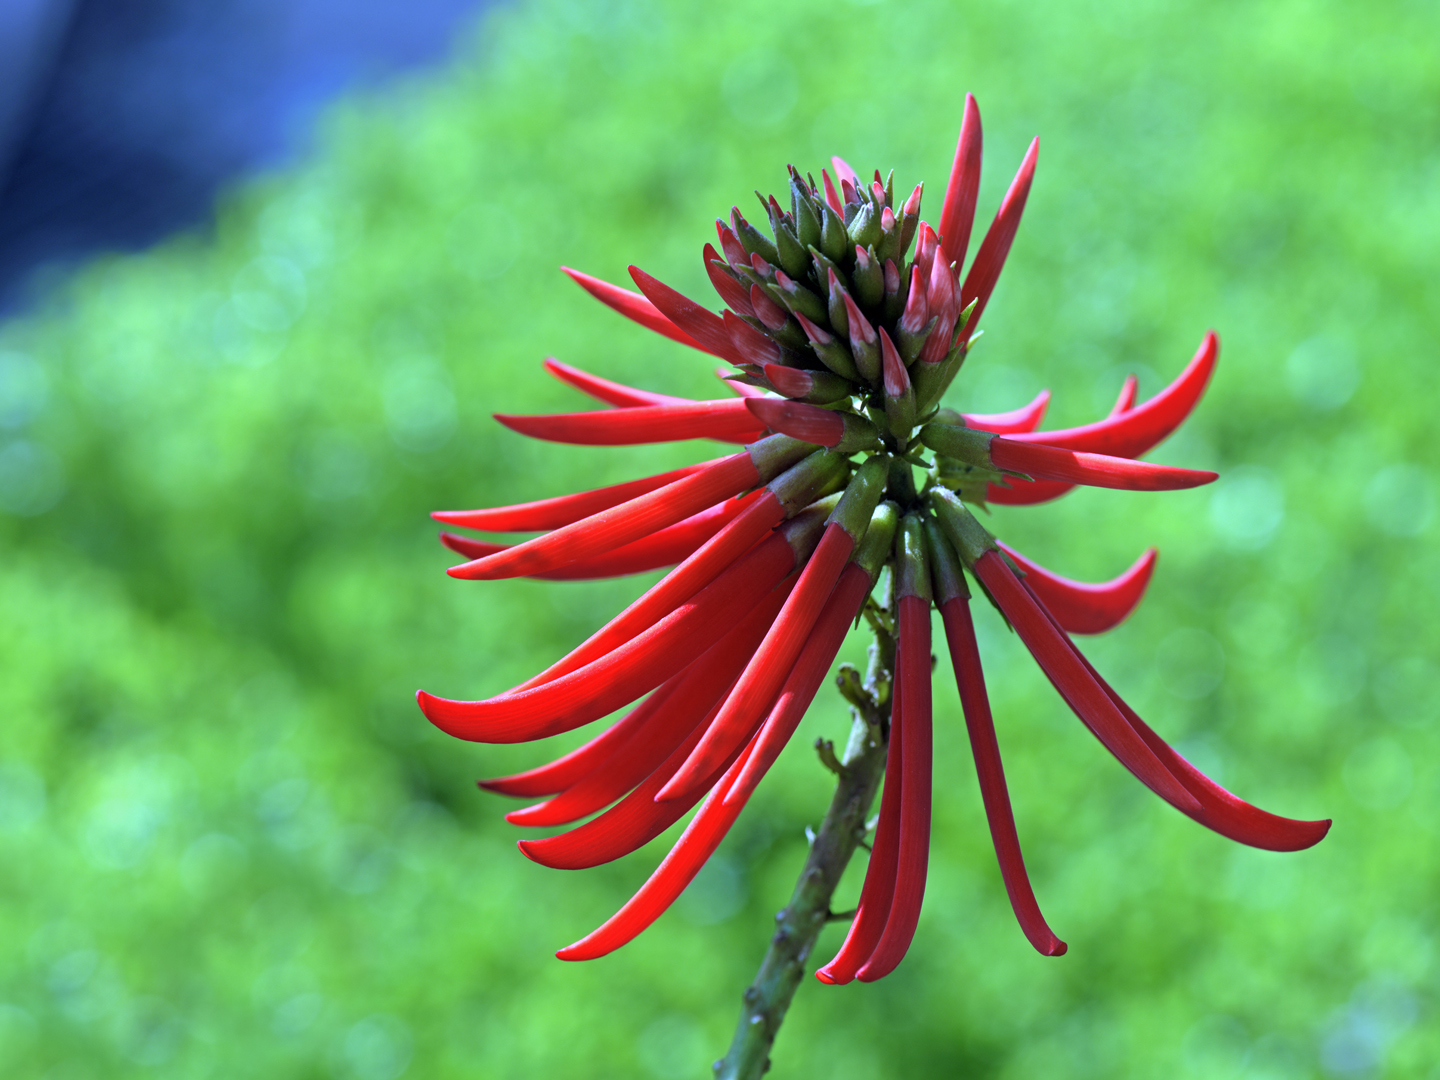 SAO PAULO, SP, BRAZIL - JULHO 9, 2015 - Erythrina speciosa, Brazilian Fabaceae greatly appreciated in gardening and landscaping